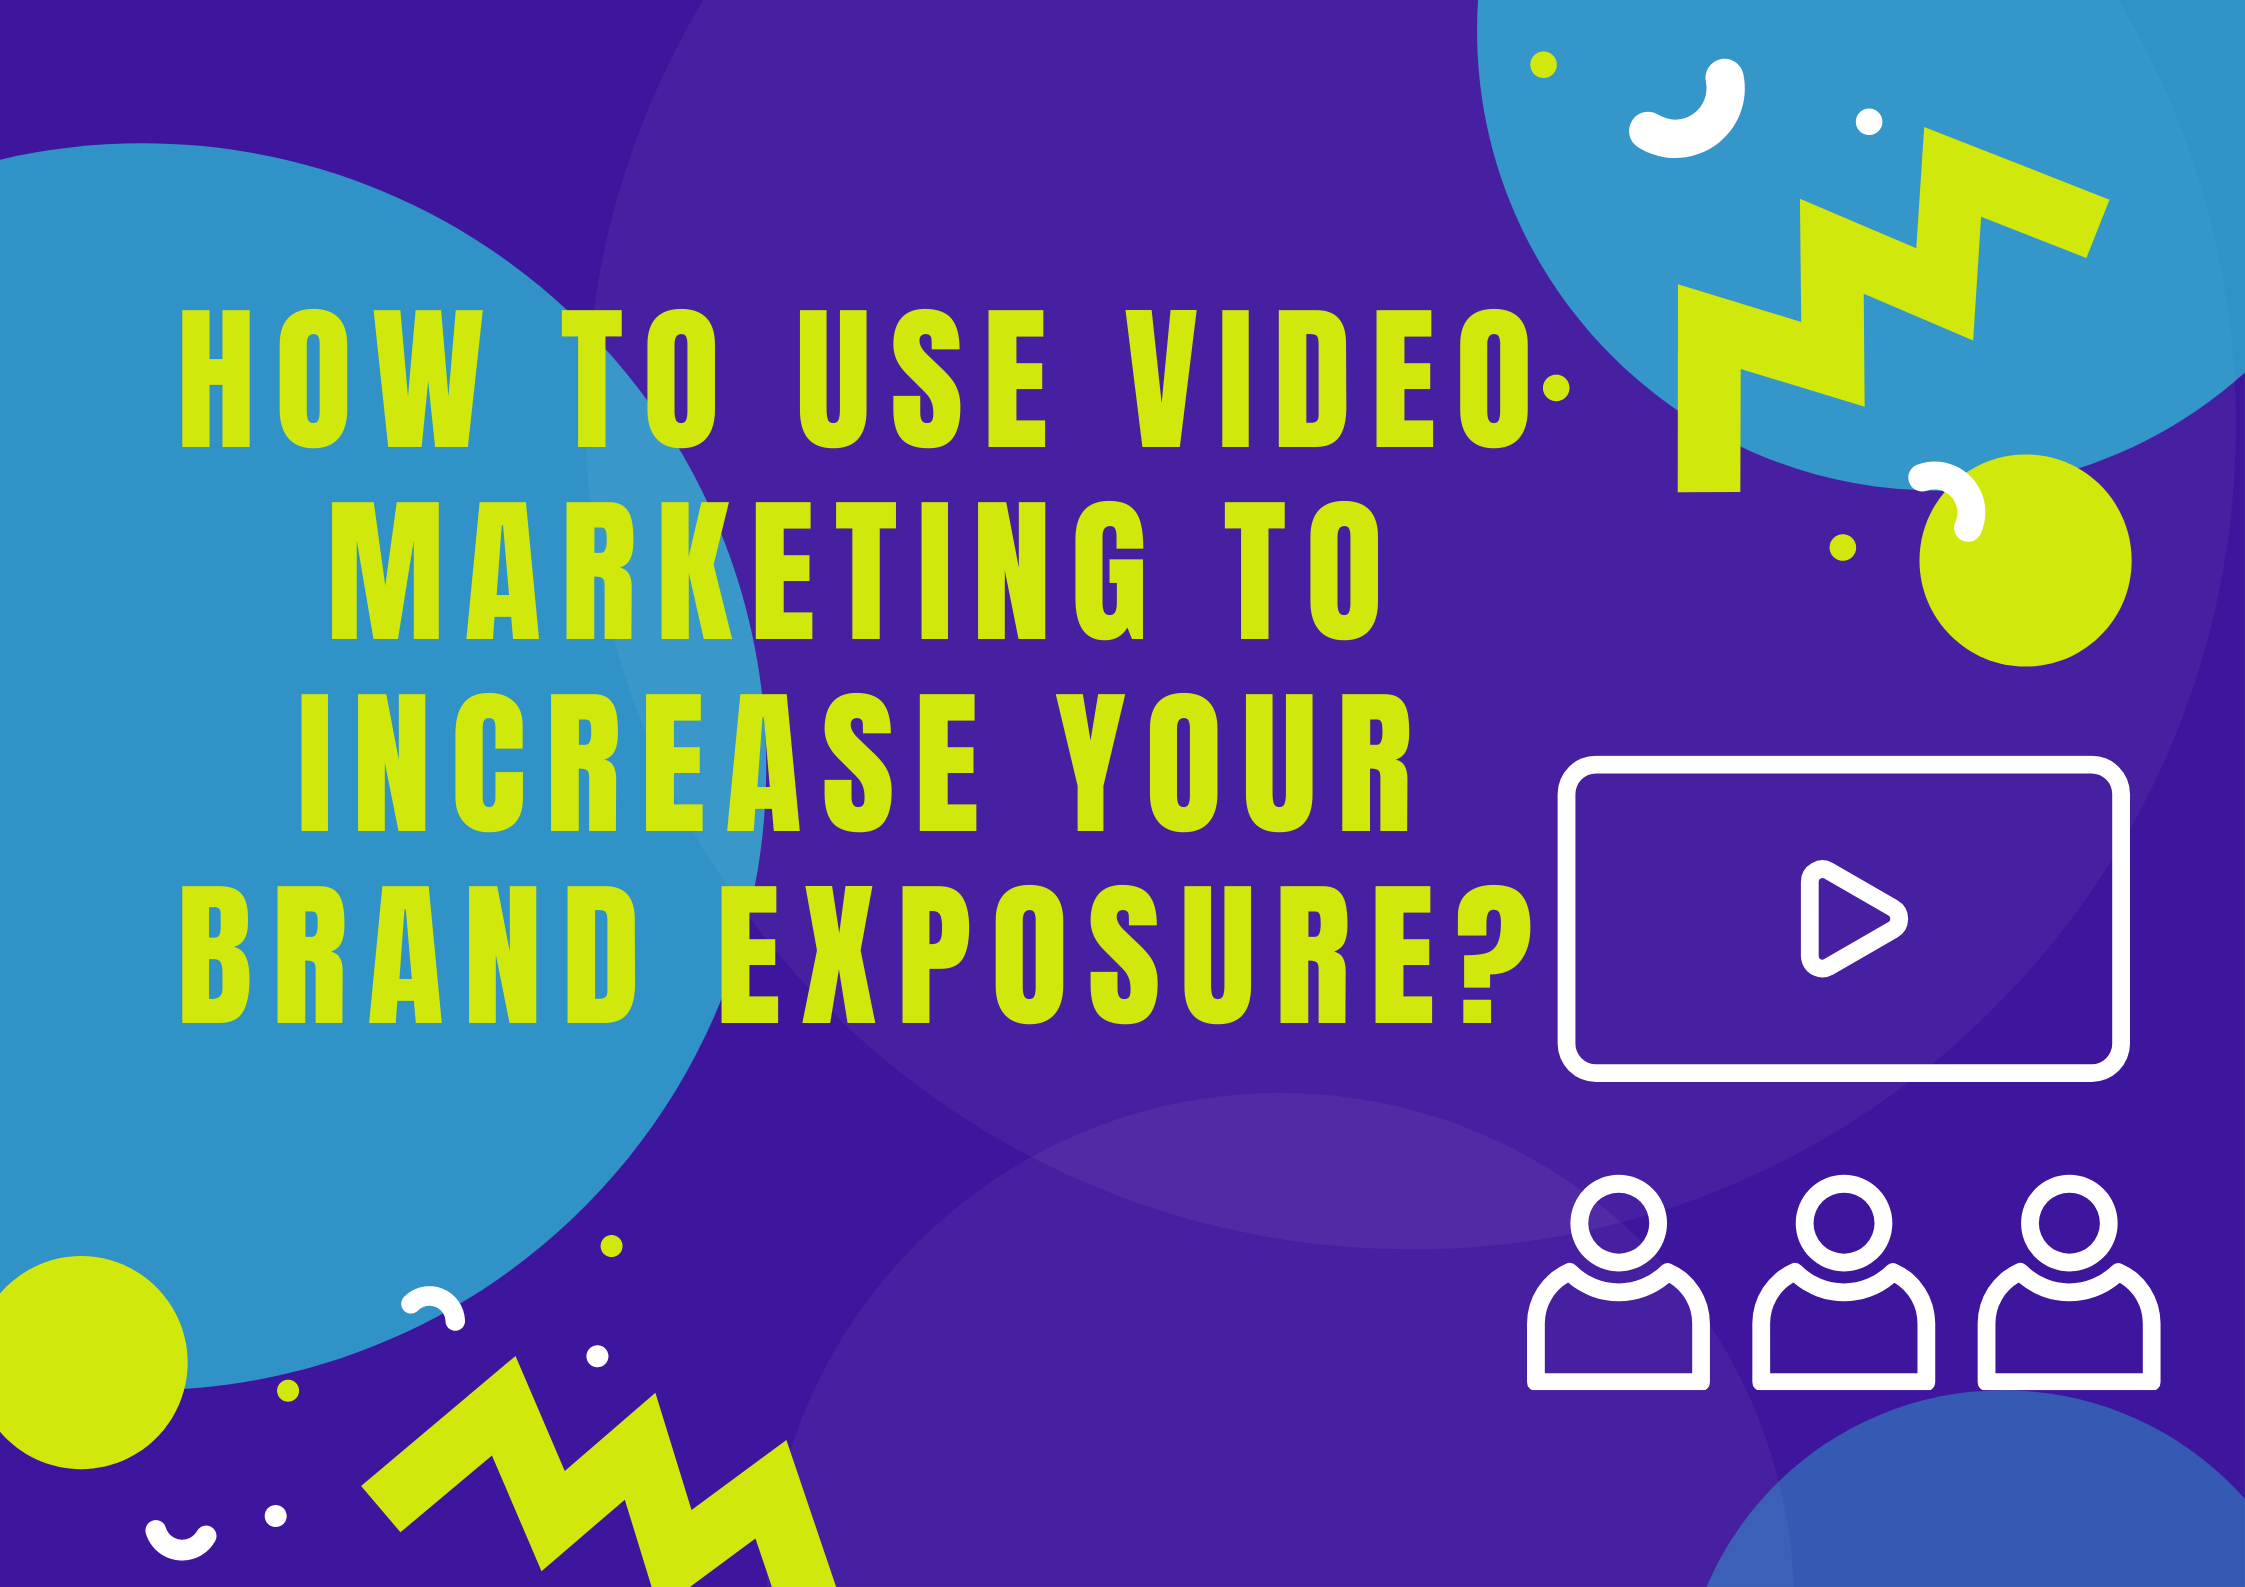 How to use video marketing to increase your brand exposure?